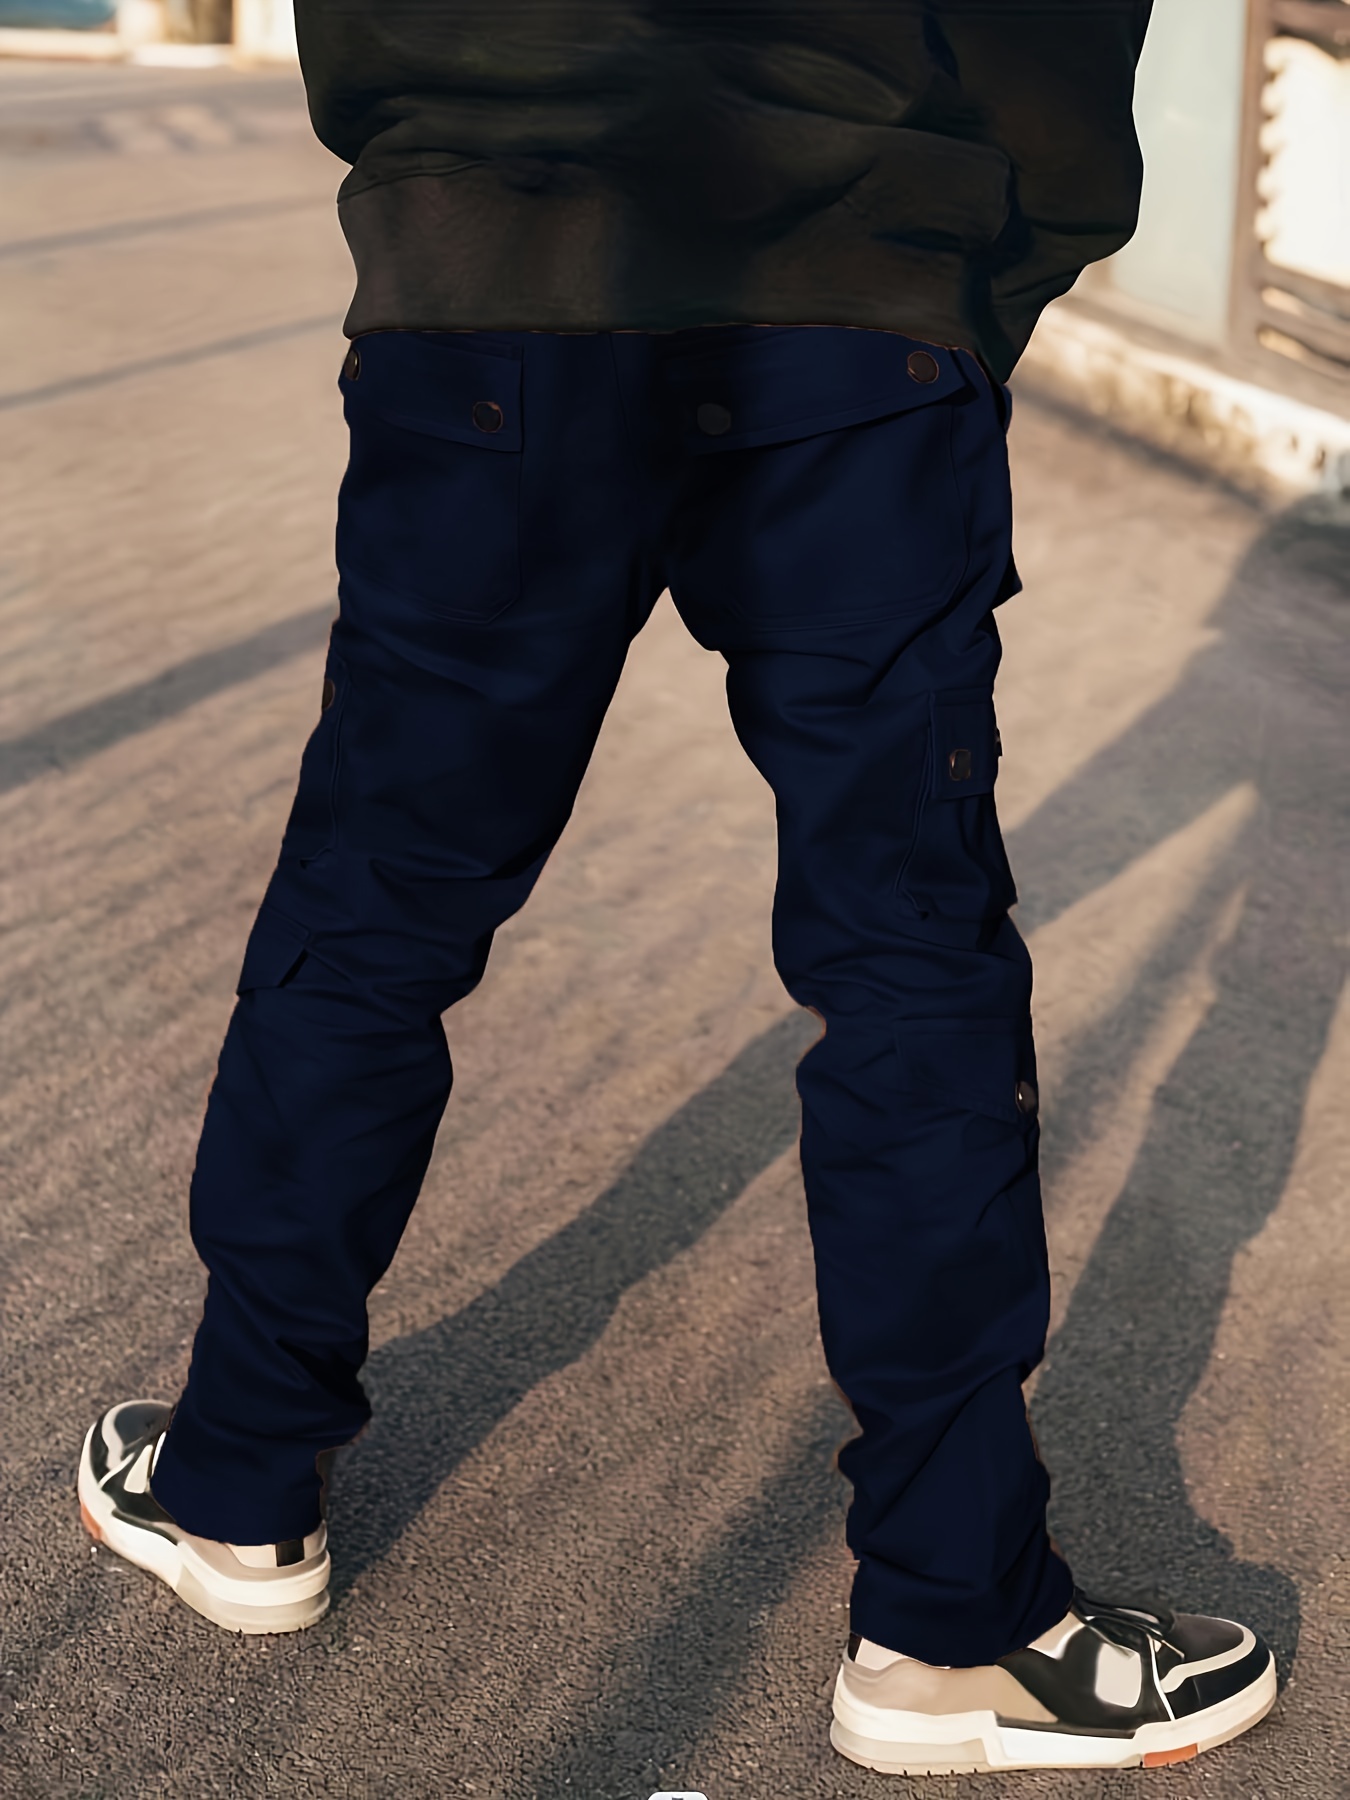 Dark Blue Cargo Pants Outfit